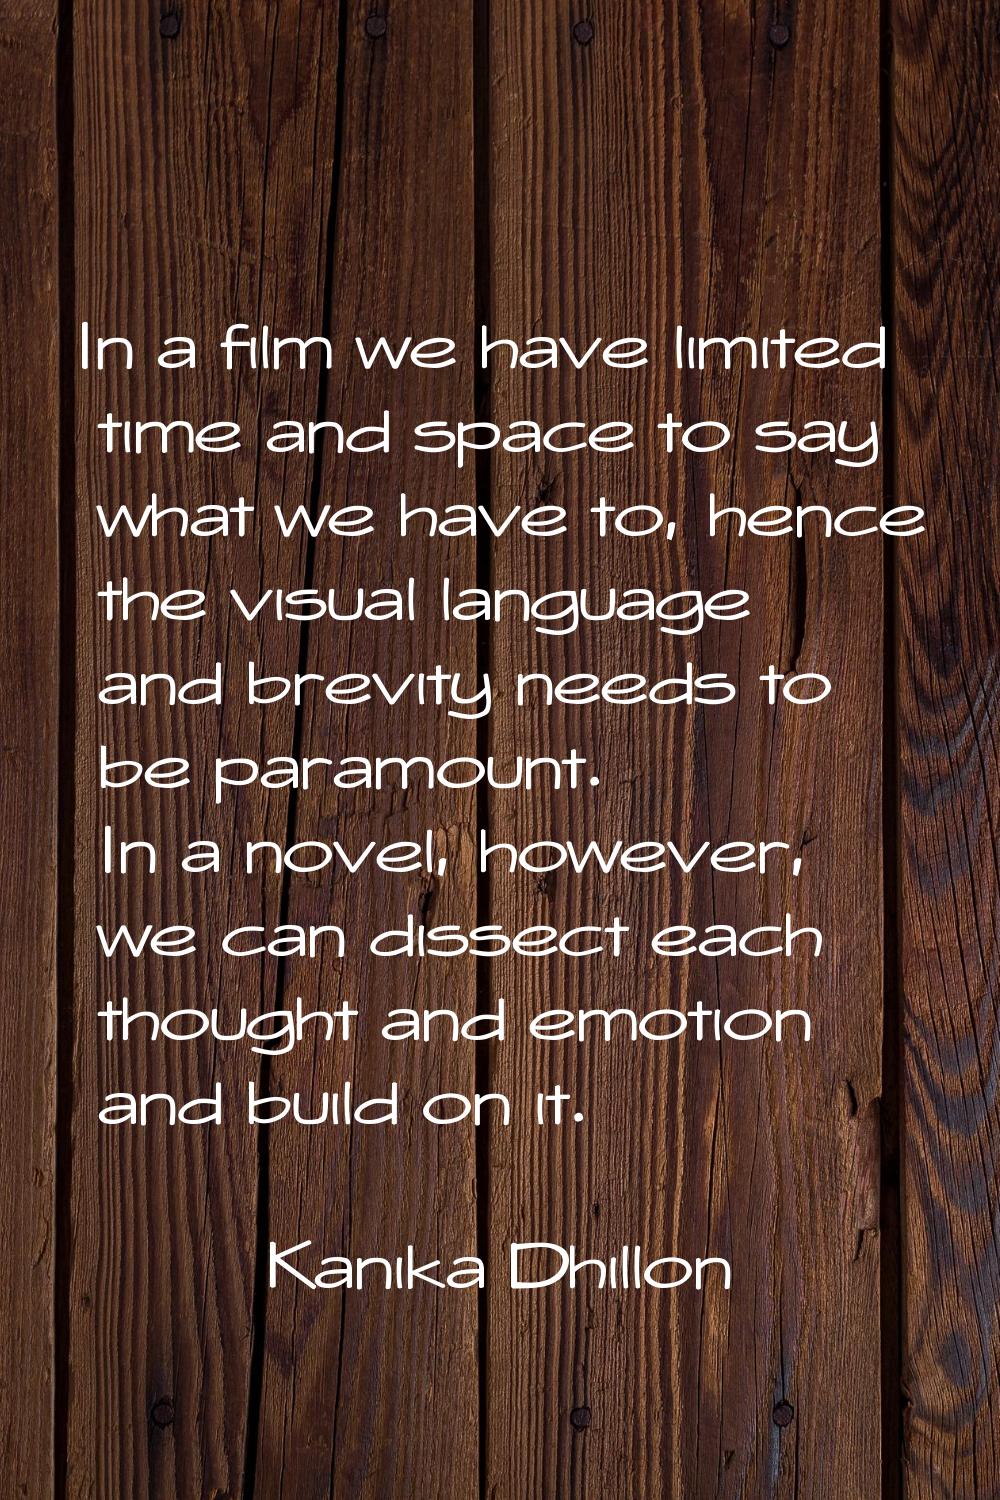 In a film we have limited time and space to say what we have to, hence the visual language and brev